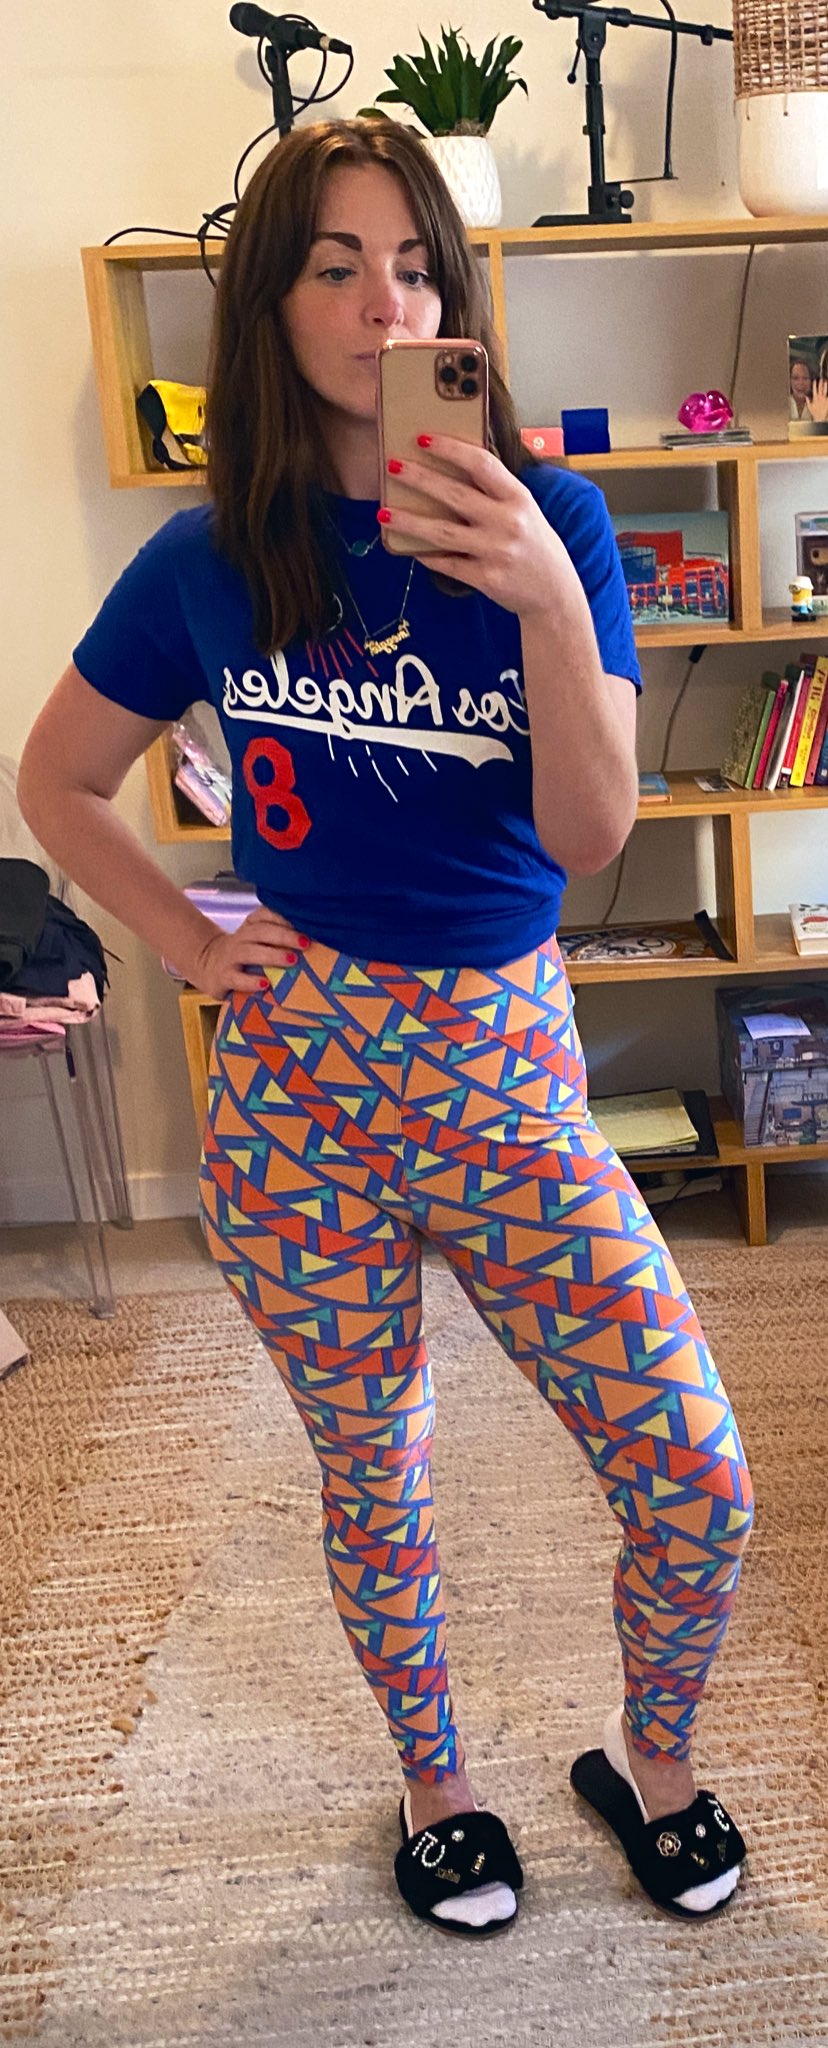 Megan Gailey on X: Here are my LuLaRoe leggings that my mom felt pressured  into buying at a legging party (Indiana) and gifted to me by saying “I will  never wear these